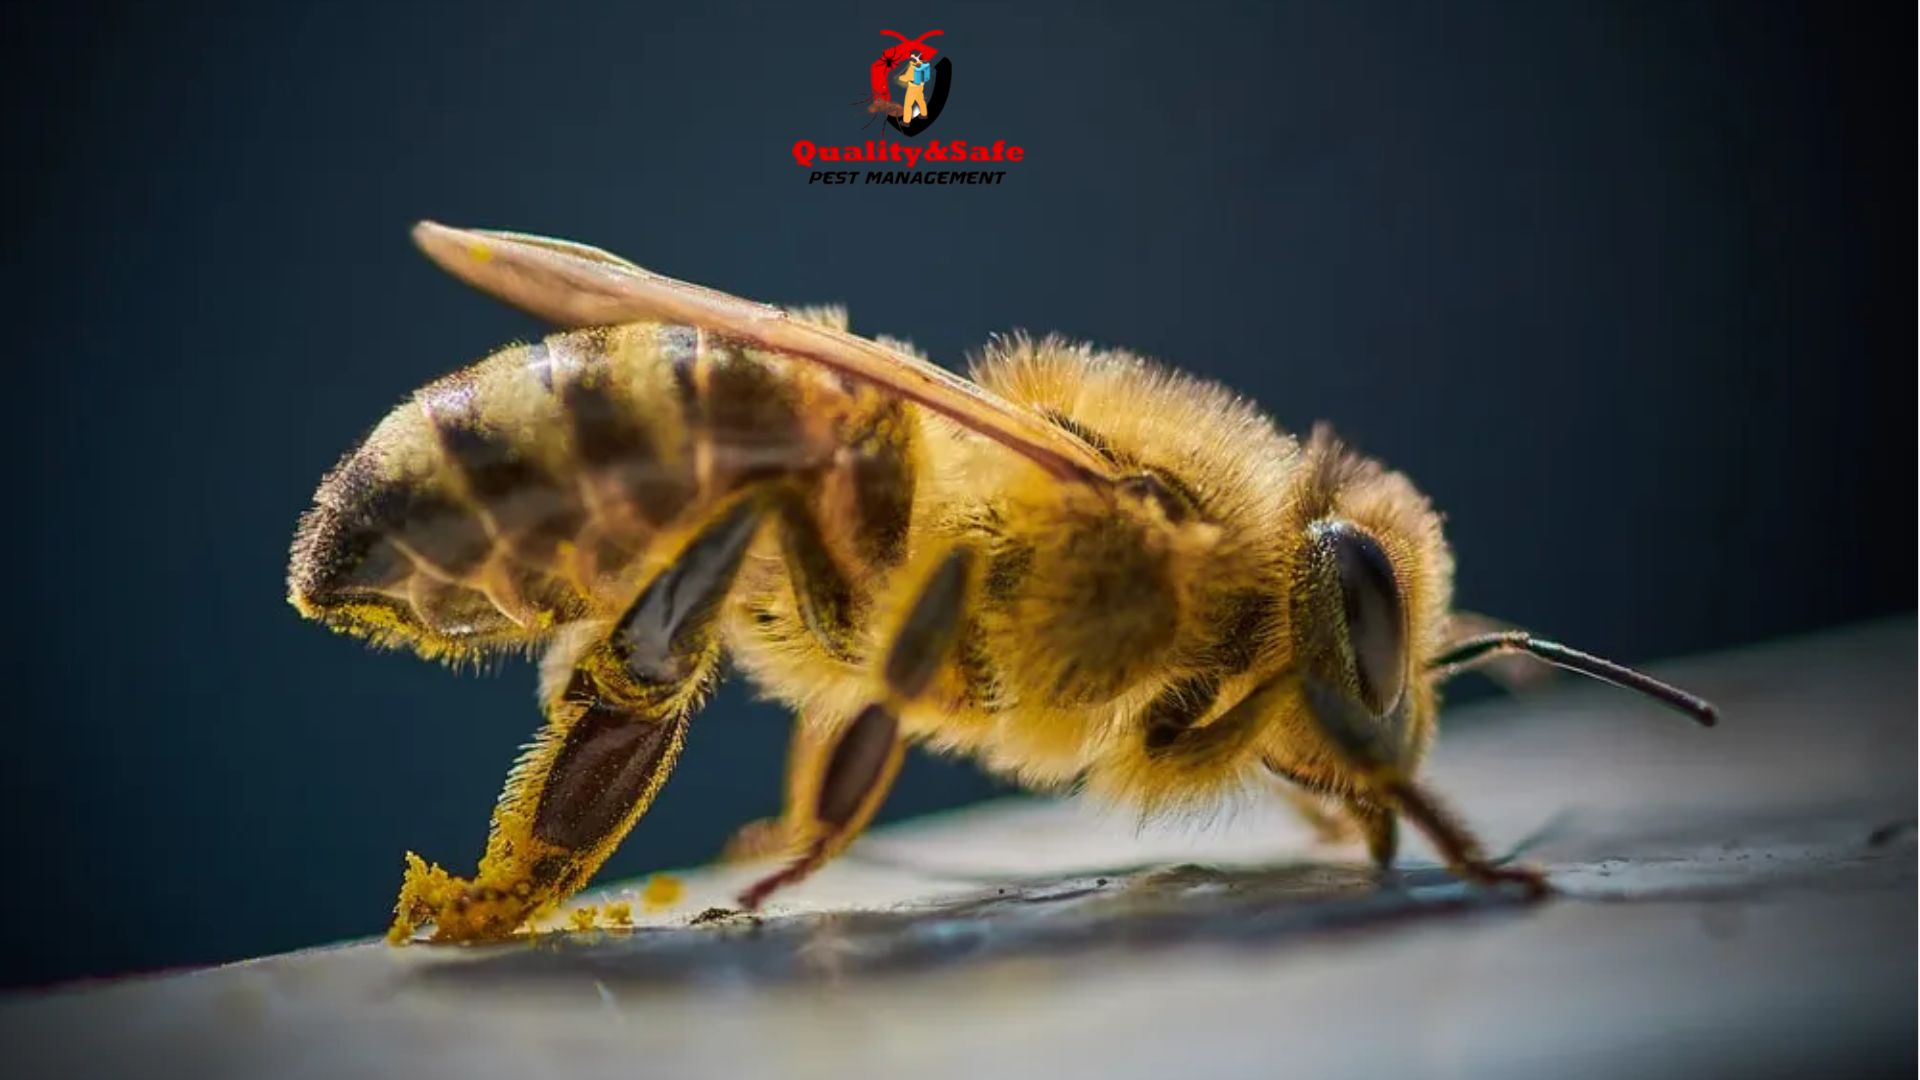 Why Have Bees Invaded Your Home and How Can You Get Rid of Them?